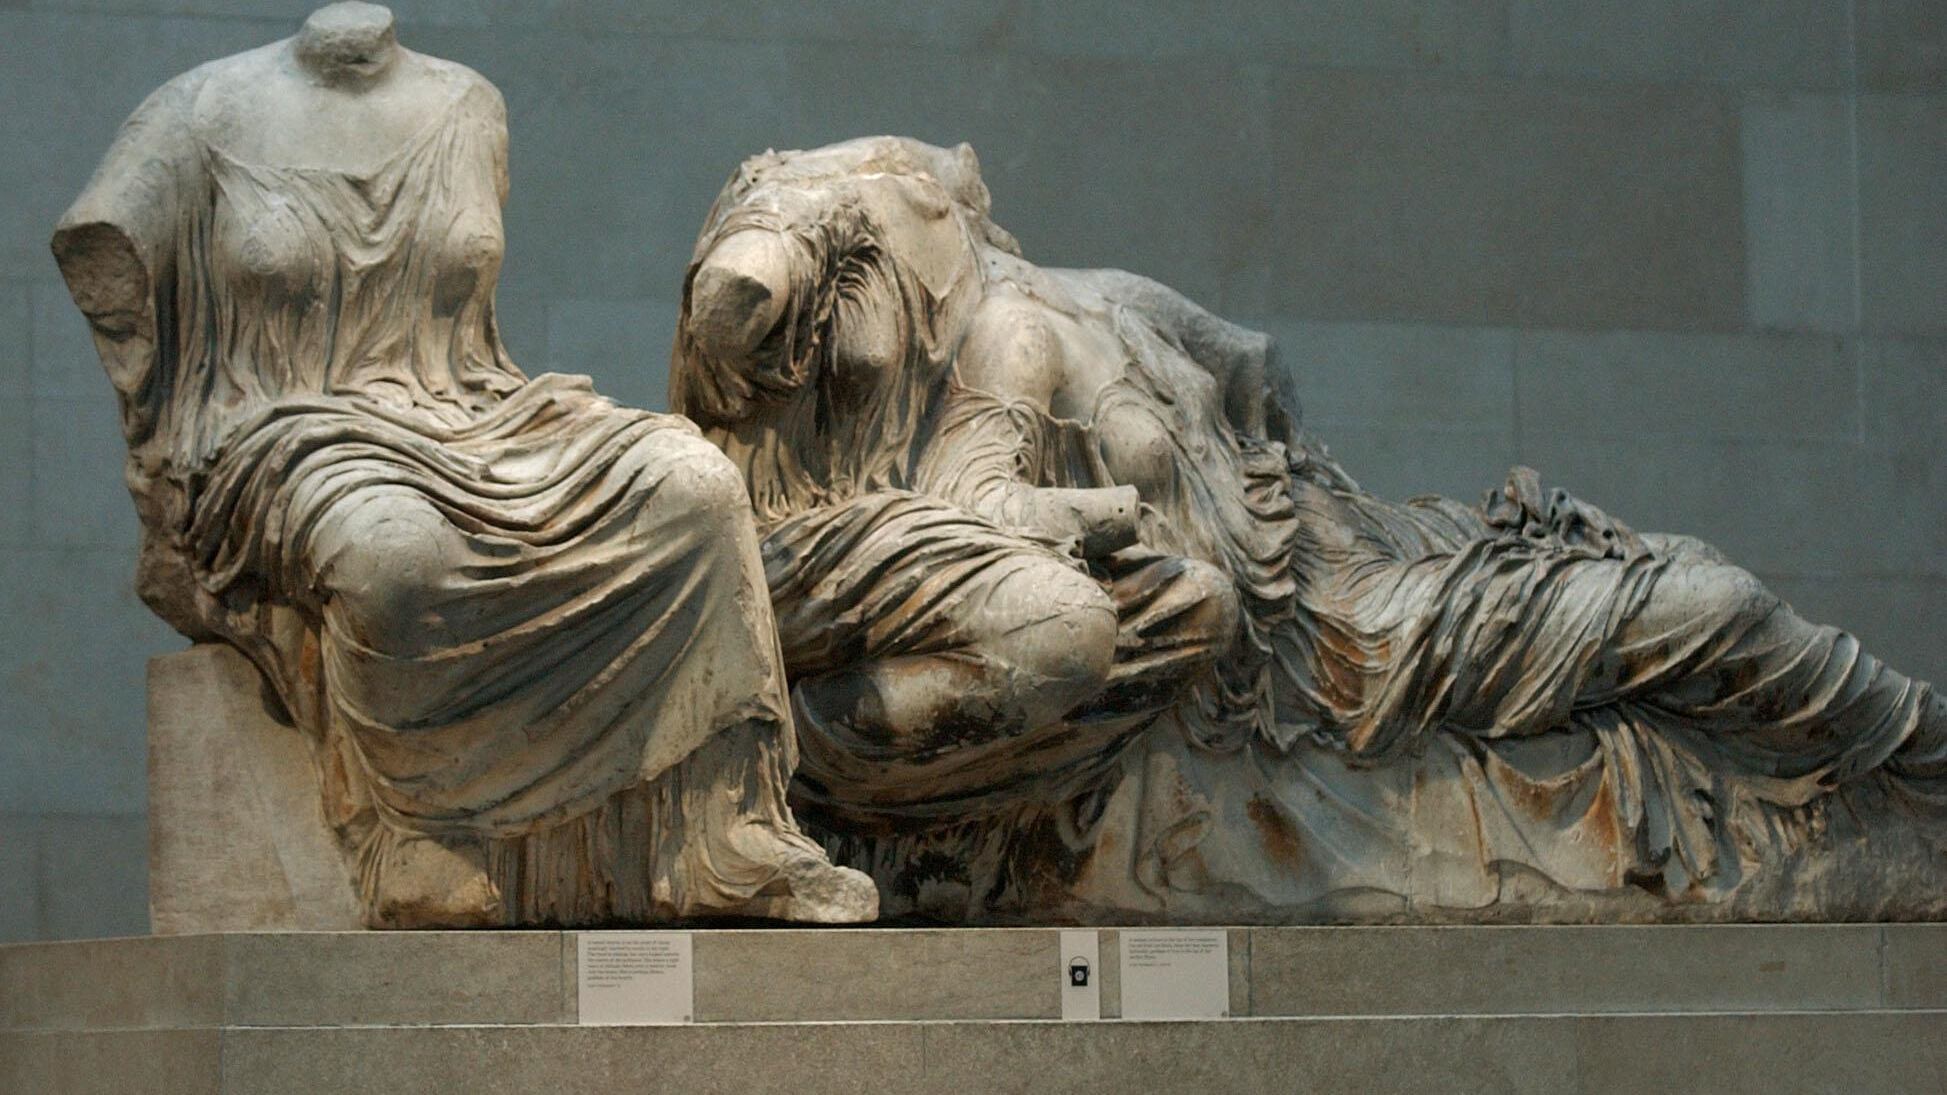 The Parthenon Marbles in London’s British Museum